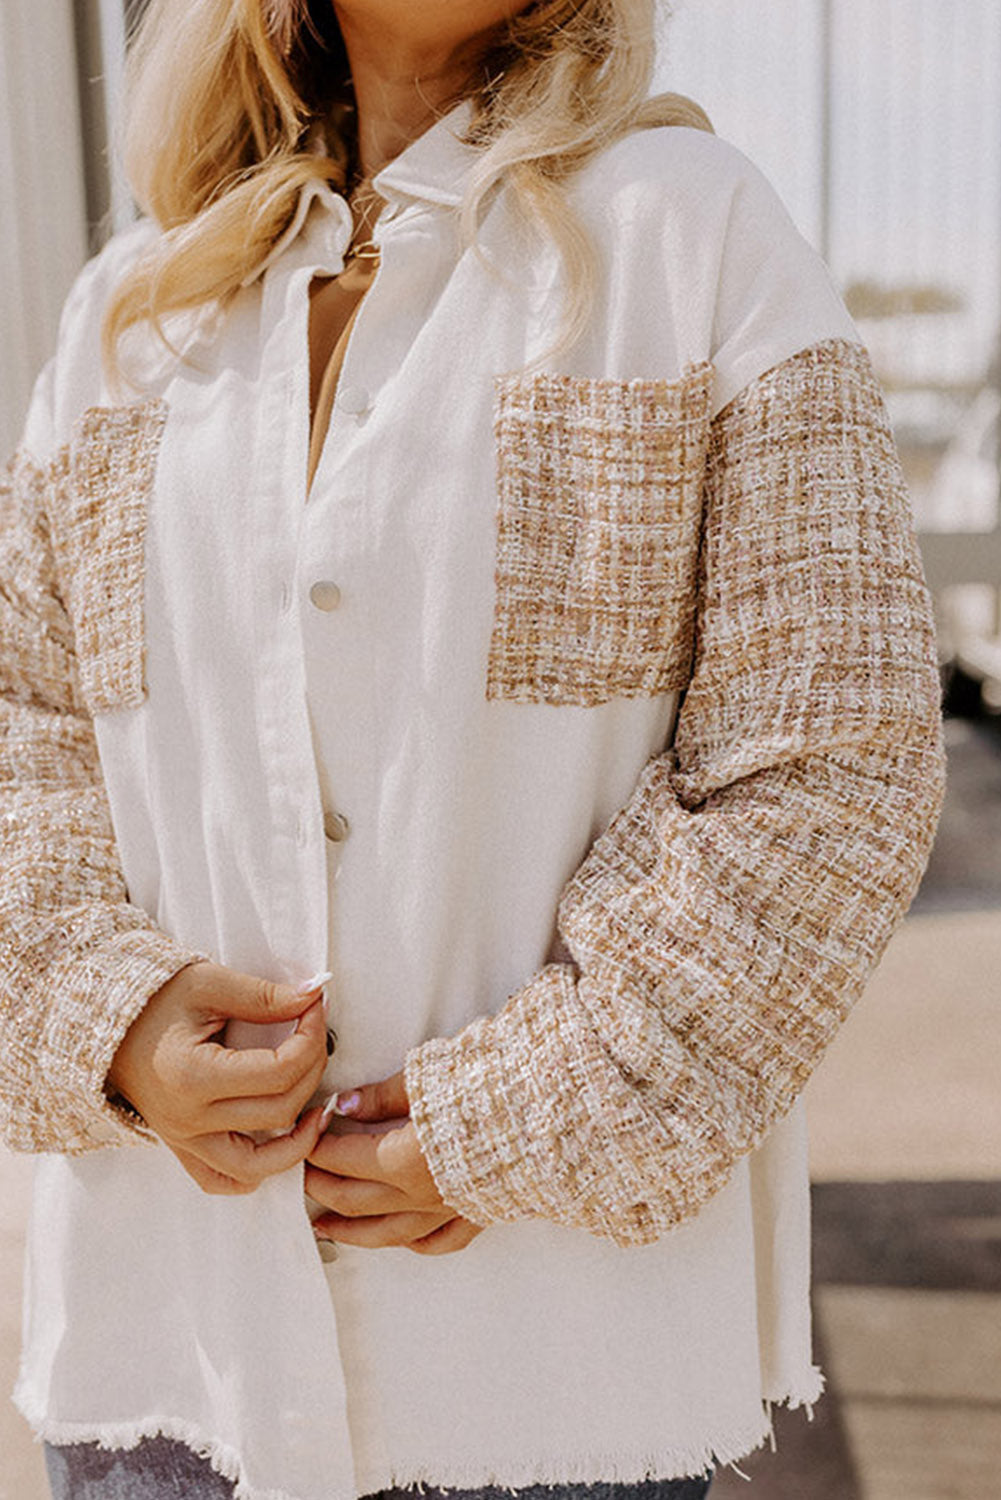 White Plus Size Tweed Patchwork Raw Hem Long Sleeve Button down shirt Jacket clothes long sleeve shirt long sleeve shirts long sleeve top long sleeve tops shirt shirts top tops